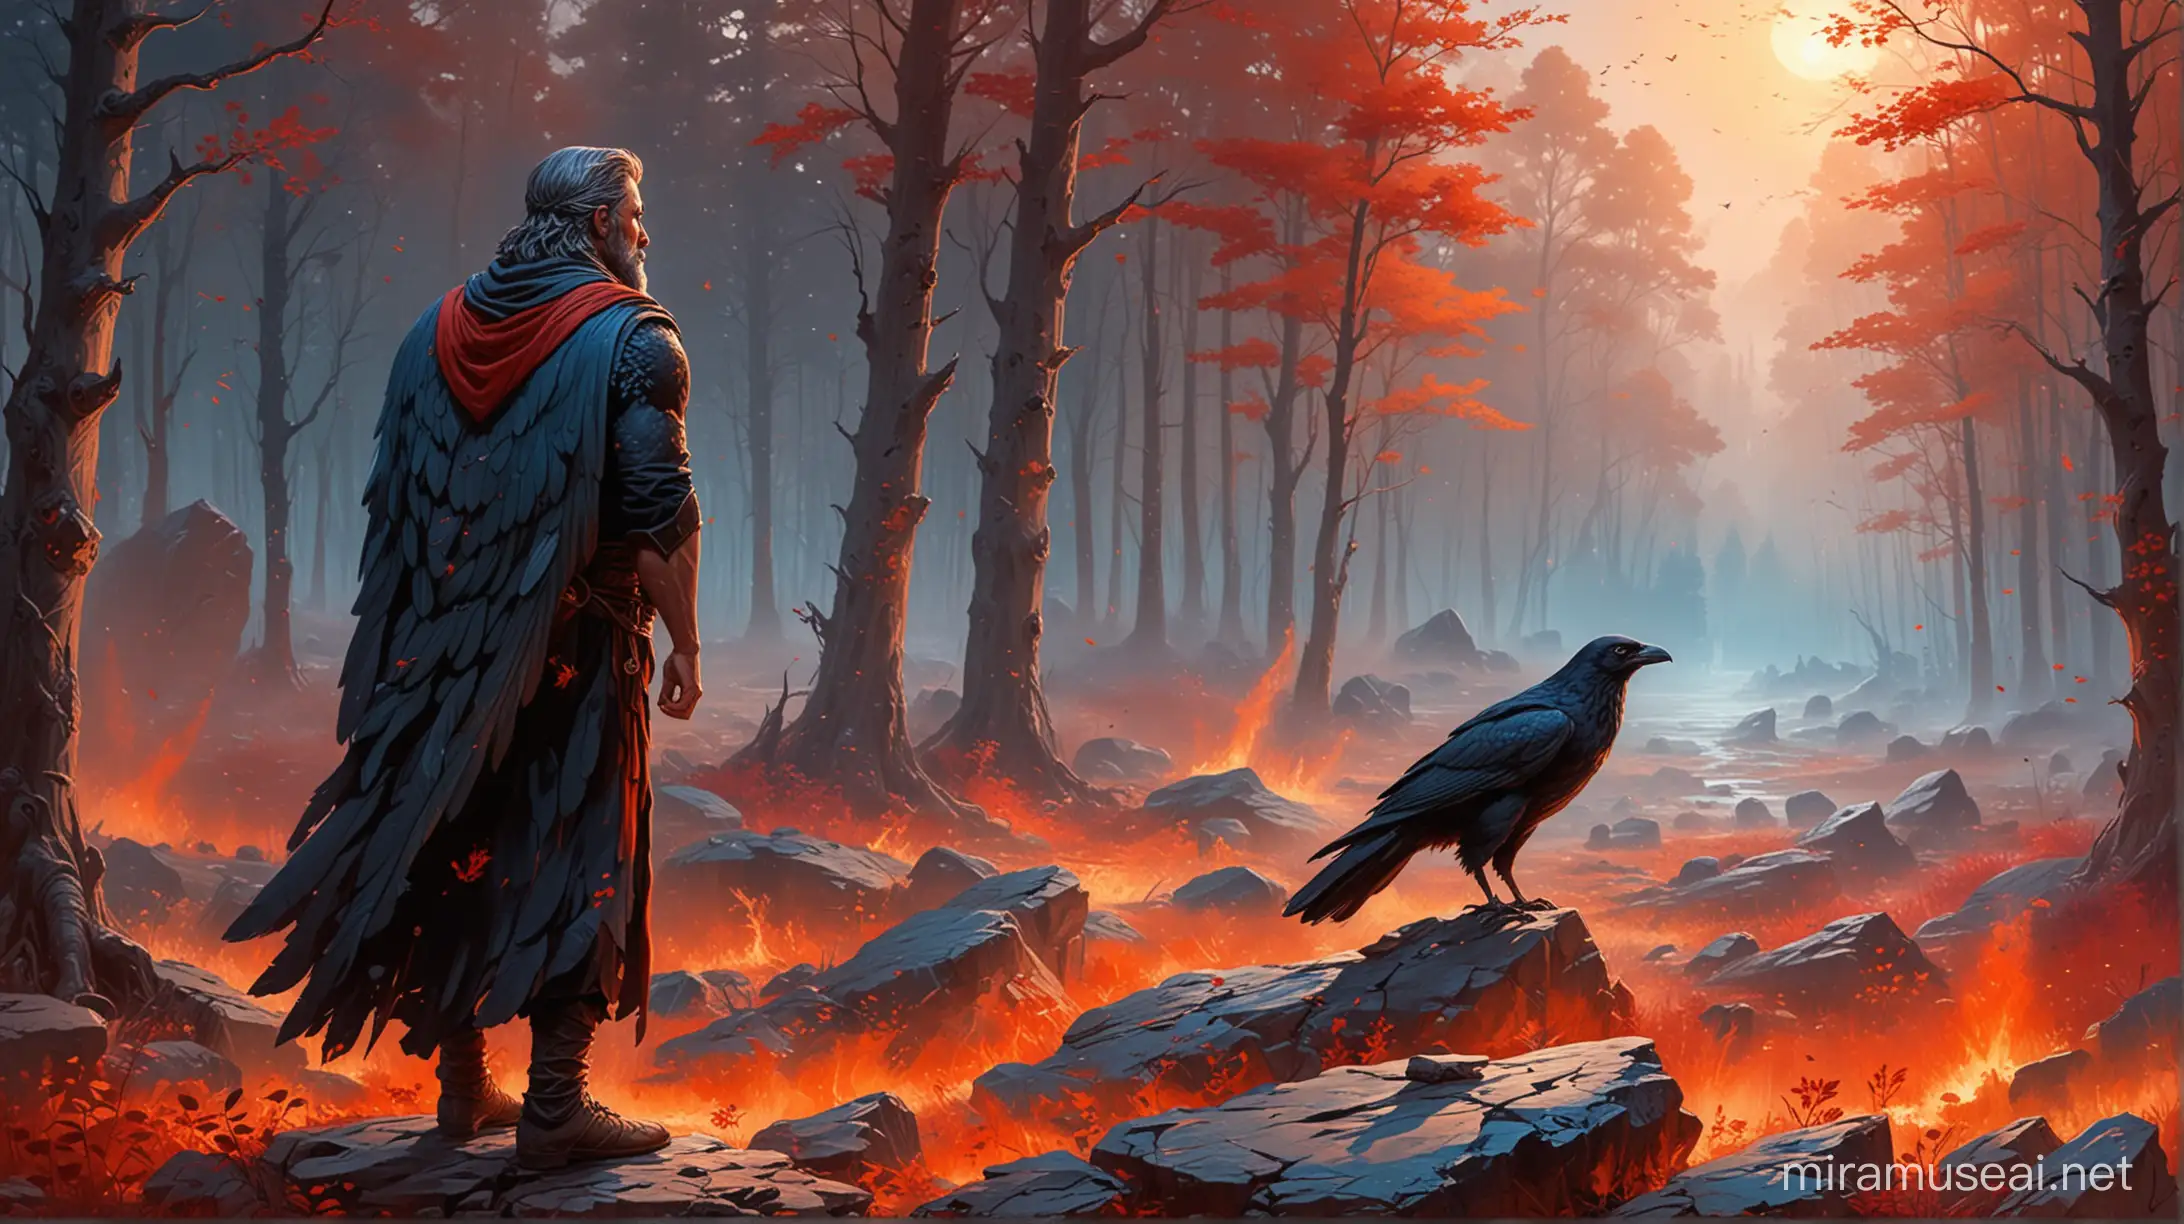 Stoicism, motivation, stoic muscular character
standing on a beautiful stone looking at the forest on fire
the leaves are red and blue in color and tan
the painting has a red glow, lots of fossils, ravens flying next to the characters